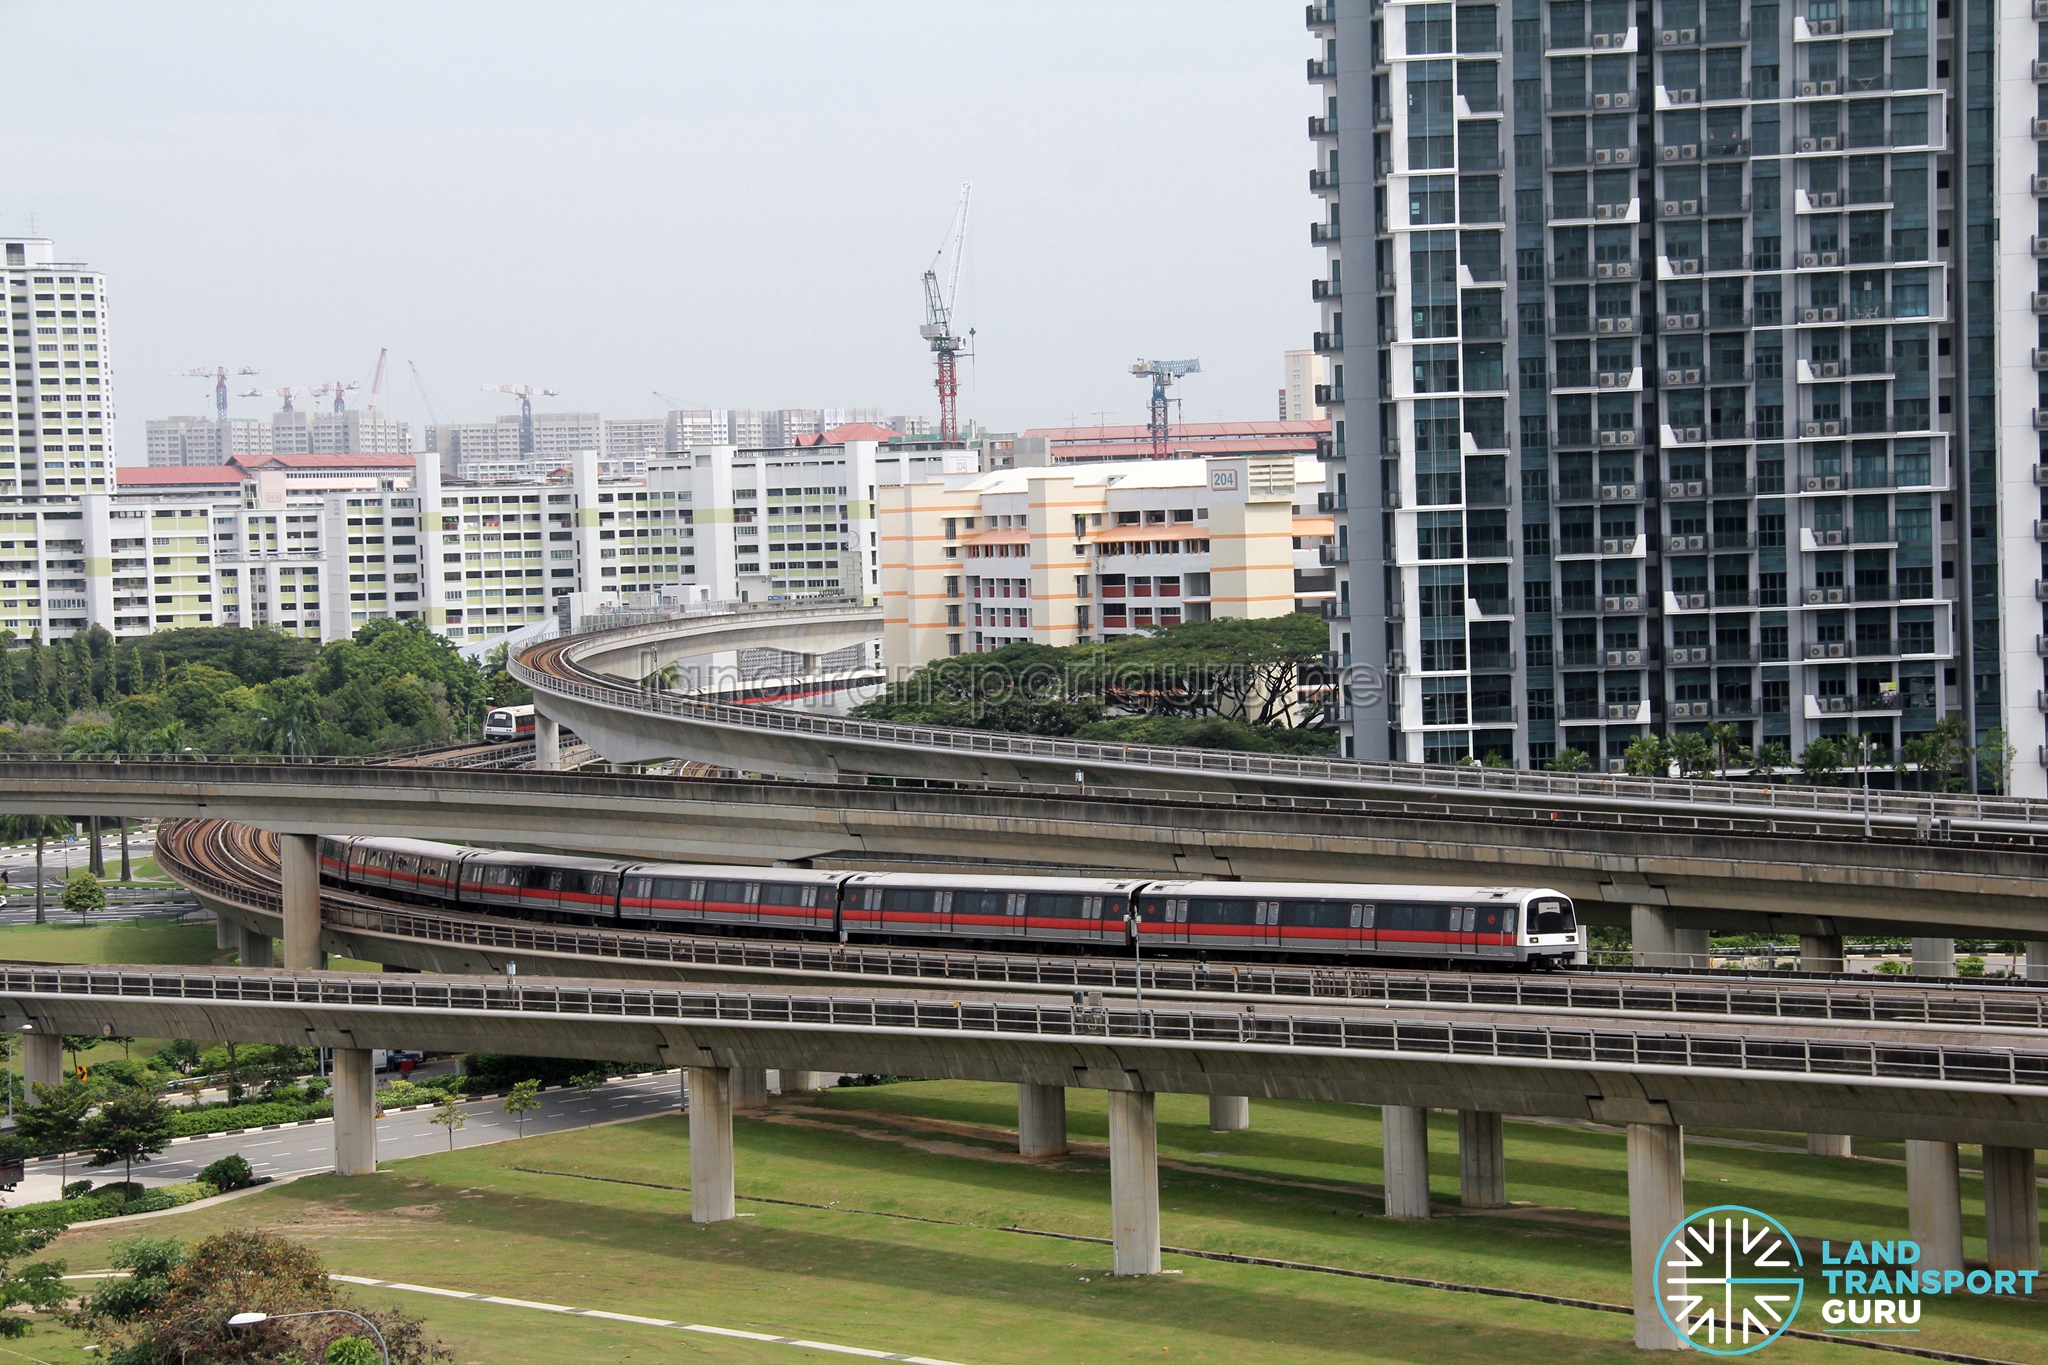 [North-South Line] Kawasaki Heavy Industries C151 approaching Jurong East